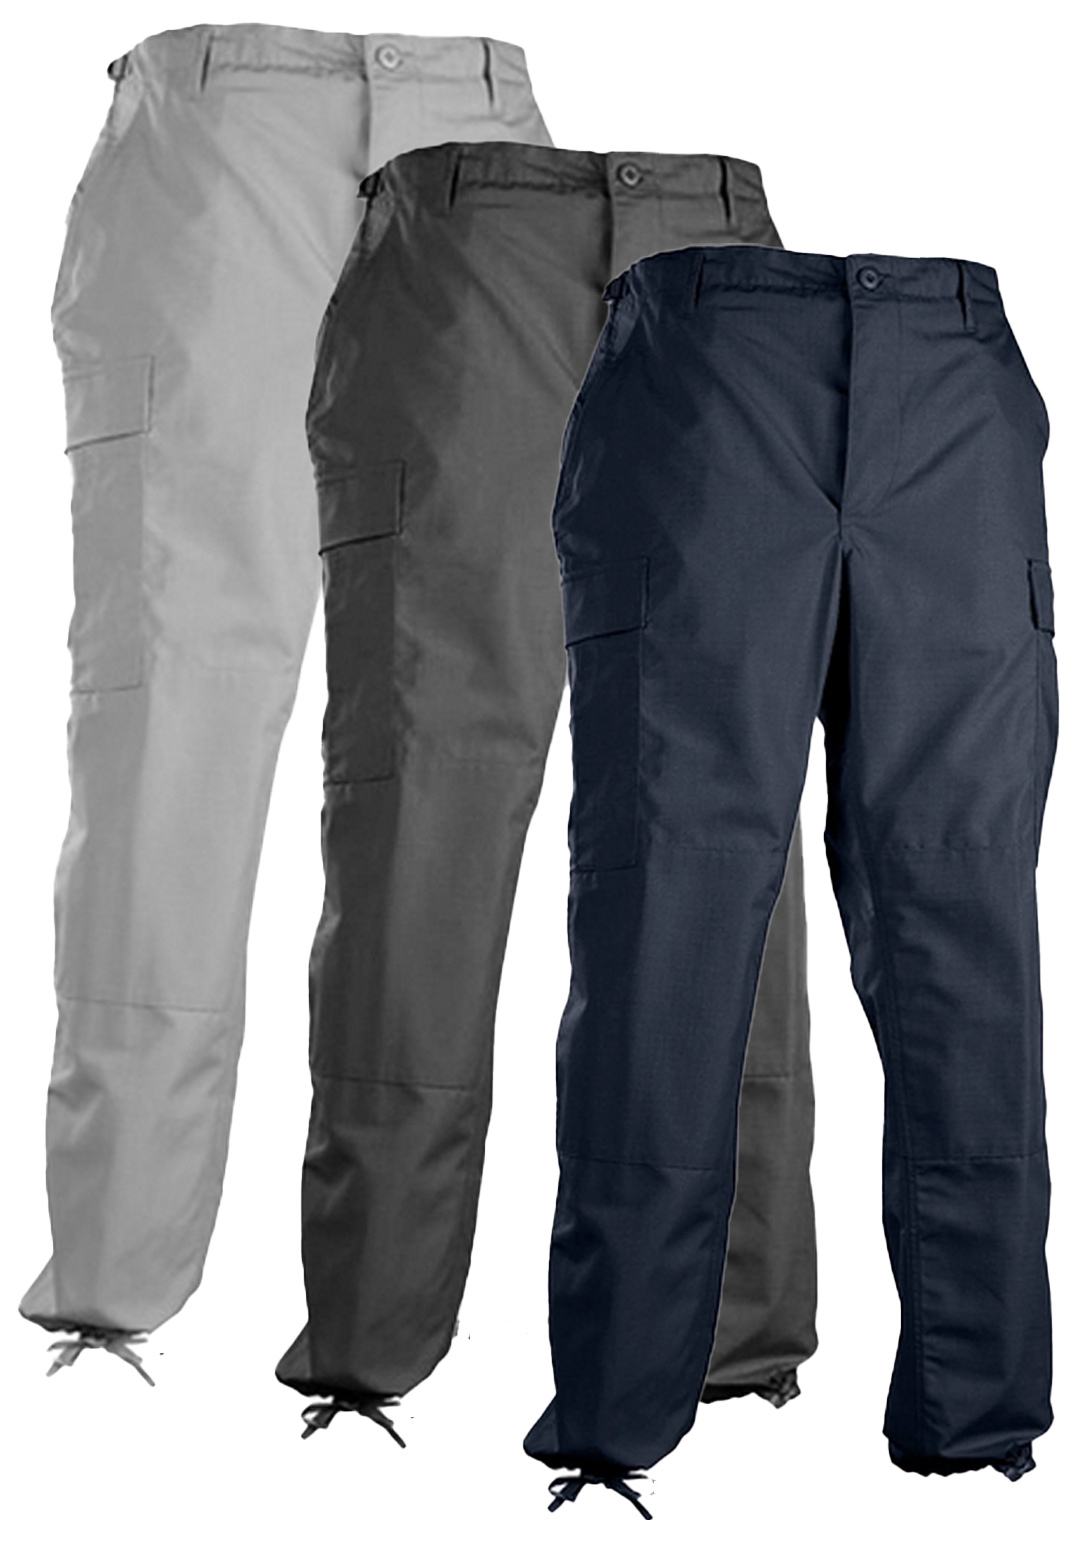 Men's Mission Made BDU Pants | Work Boots Superstore | WorkBoots.com